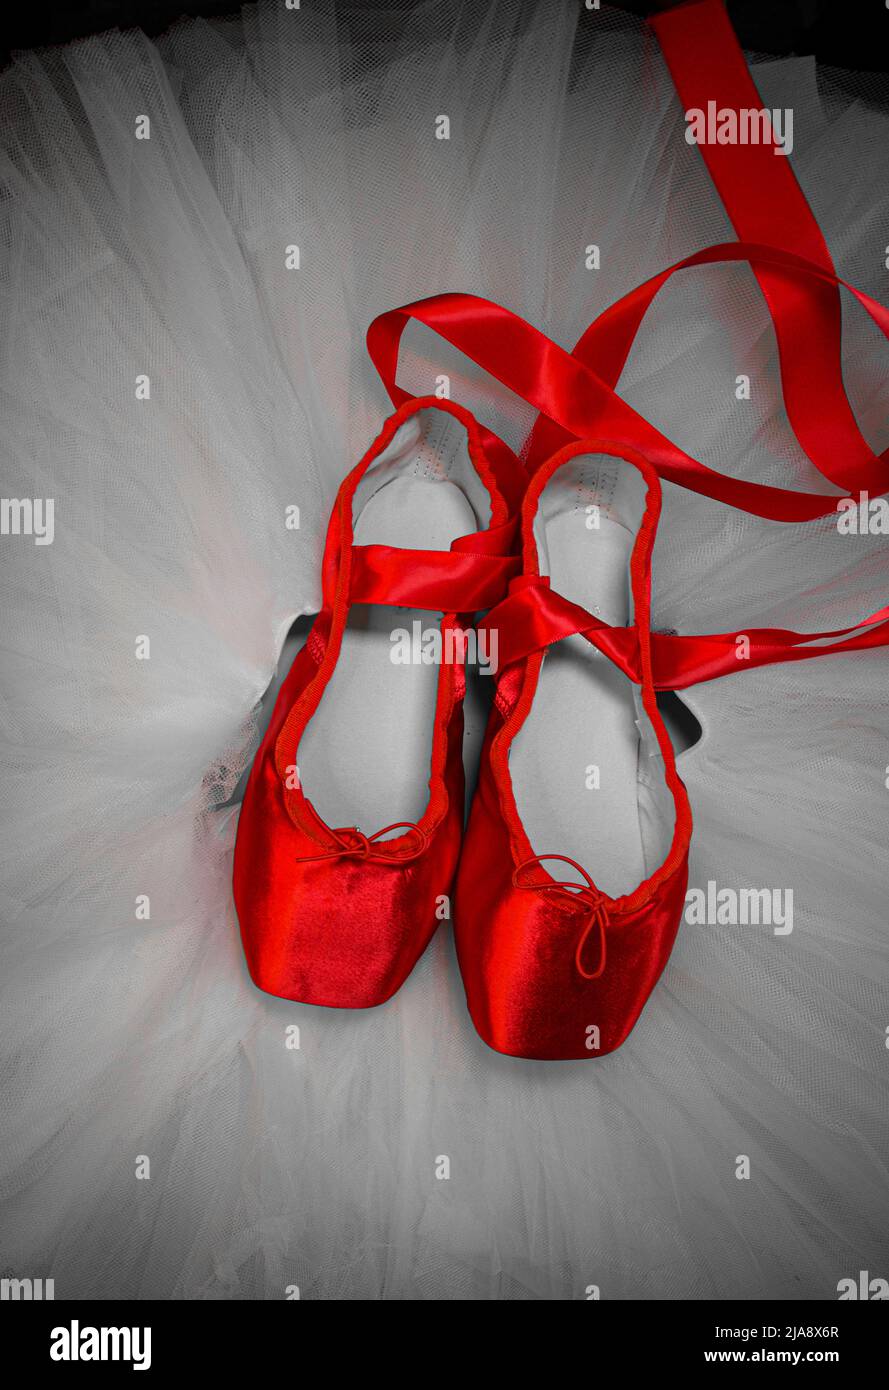 Red ballet pointe shoes resting on a black tutu. Stock Photo